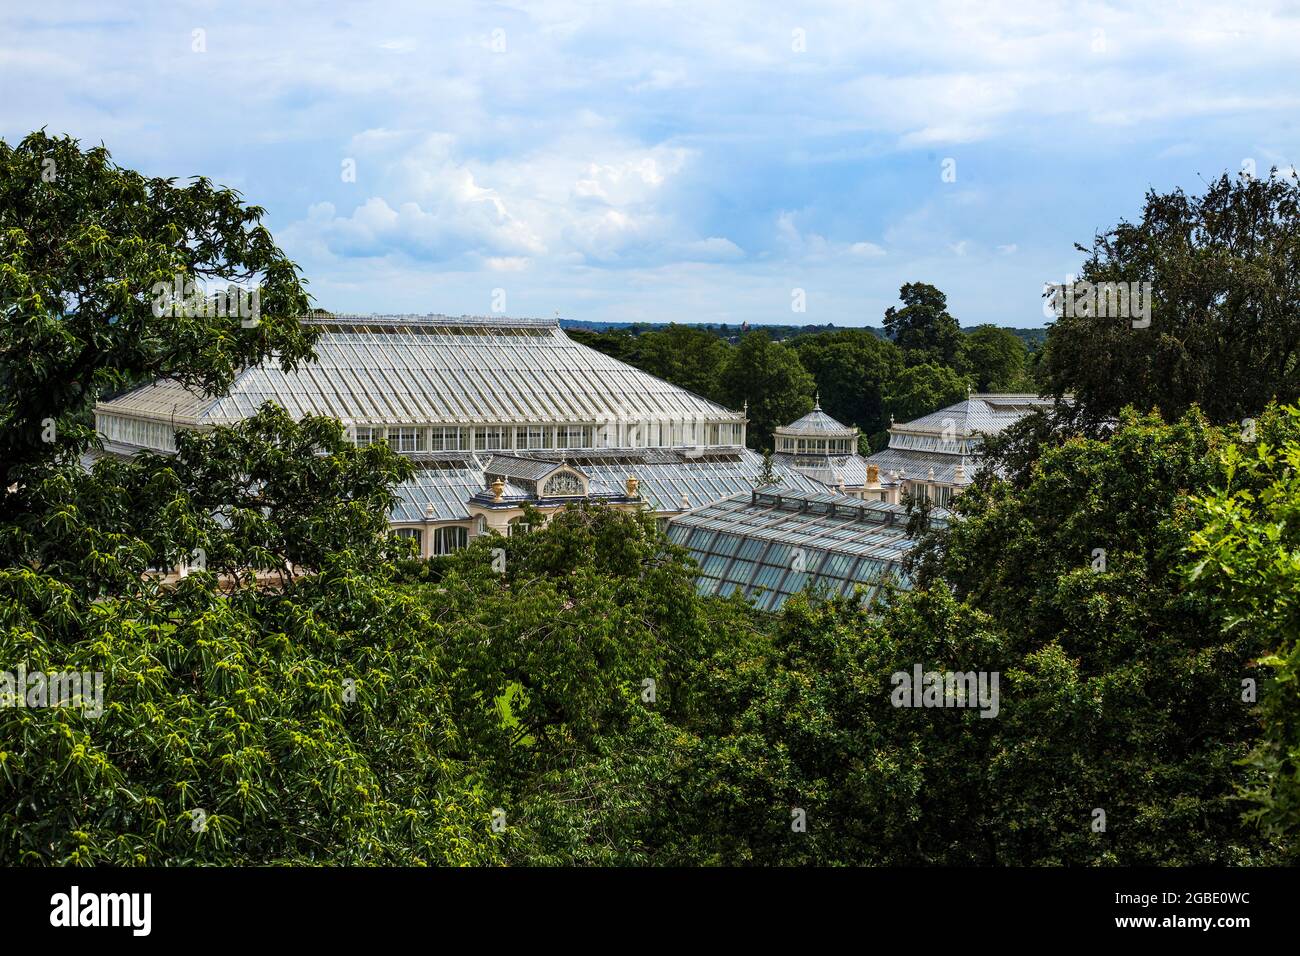 Kew Gardens, London 2021.  Aerial view of the Temperate House as seen from the Tree Top Walkway, which is an elevated walkway through the tree canopy. Stock Photo